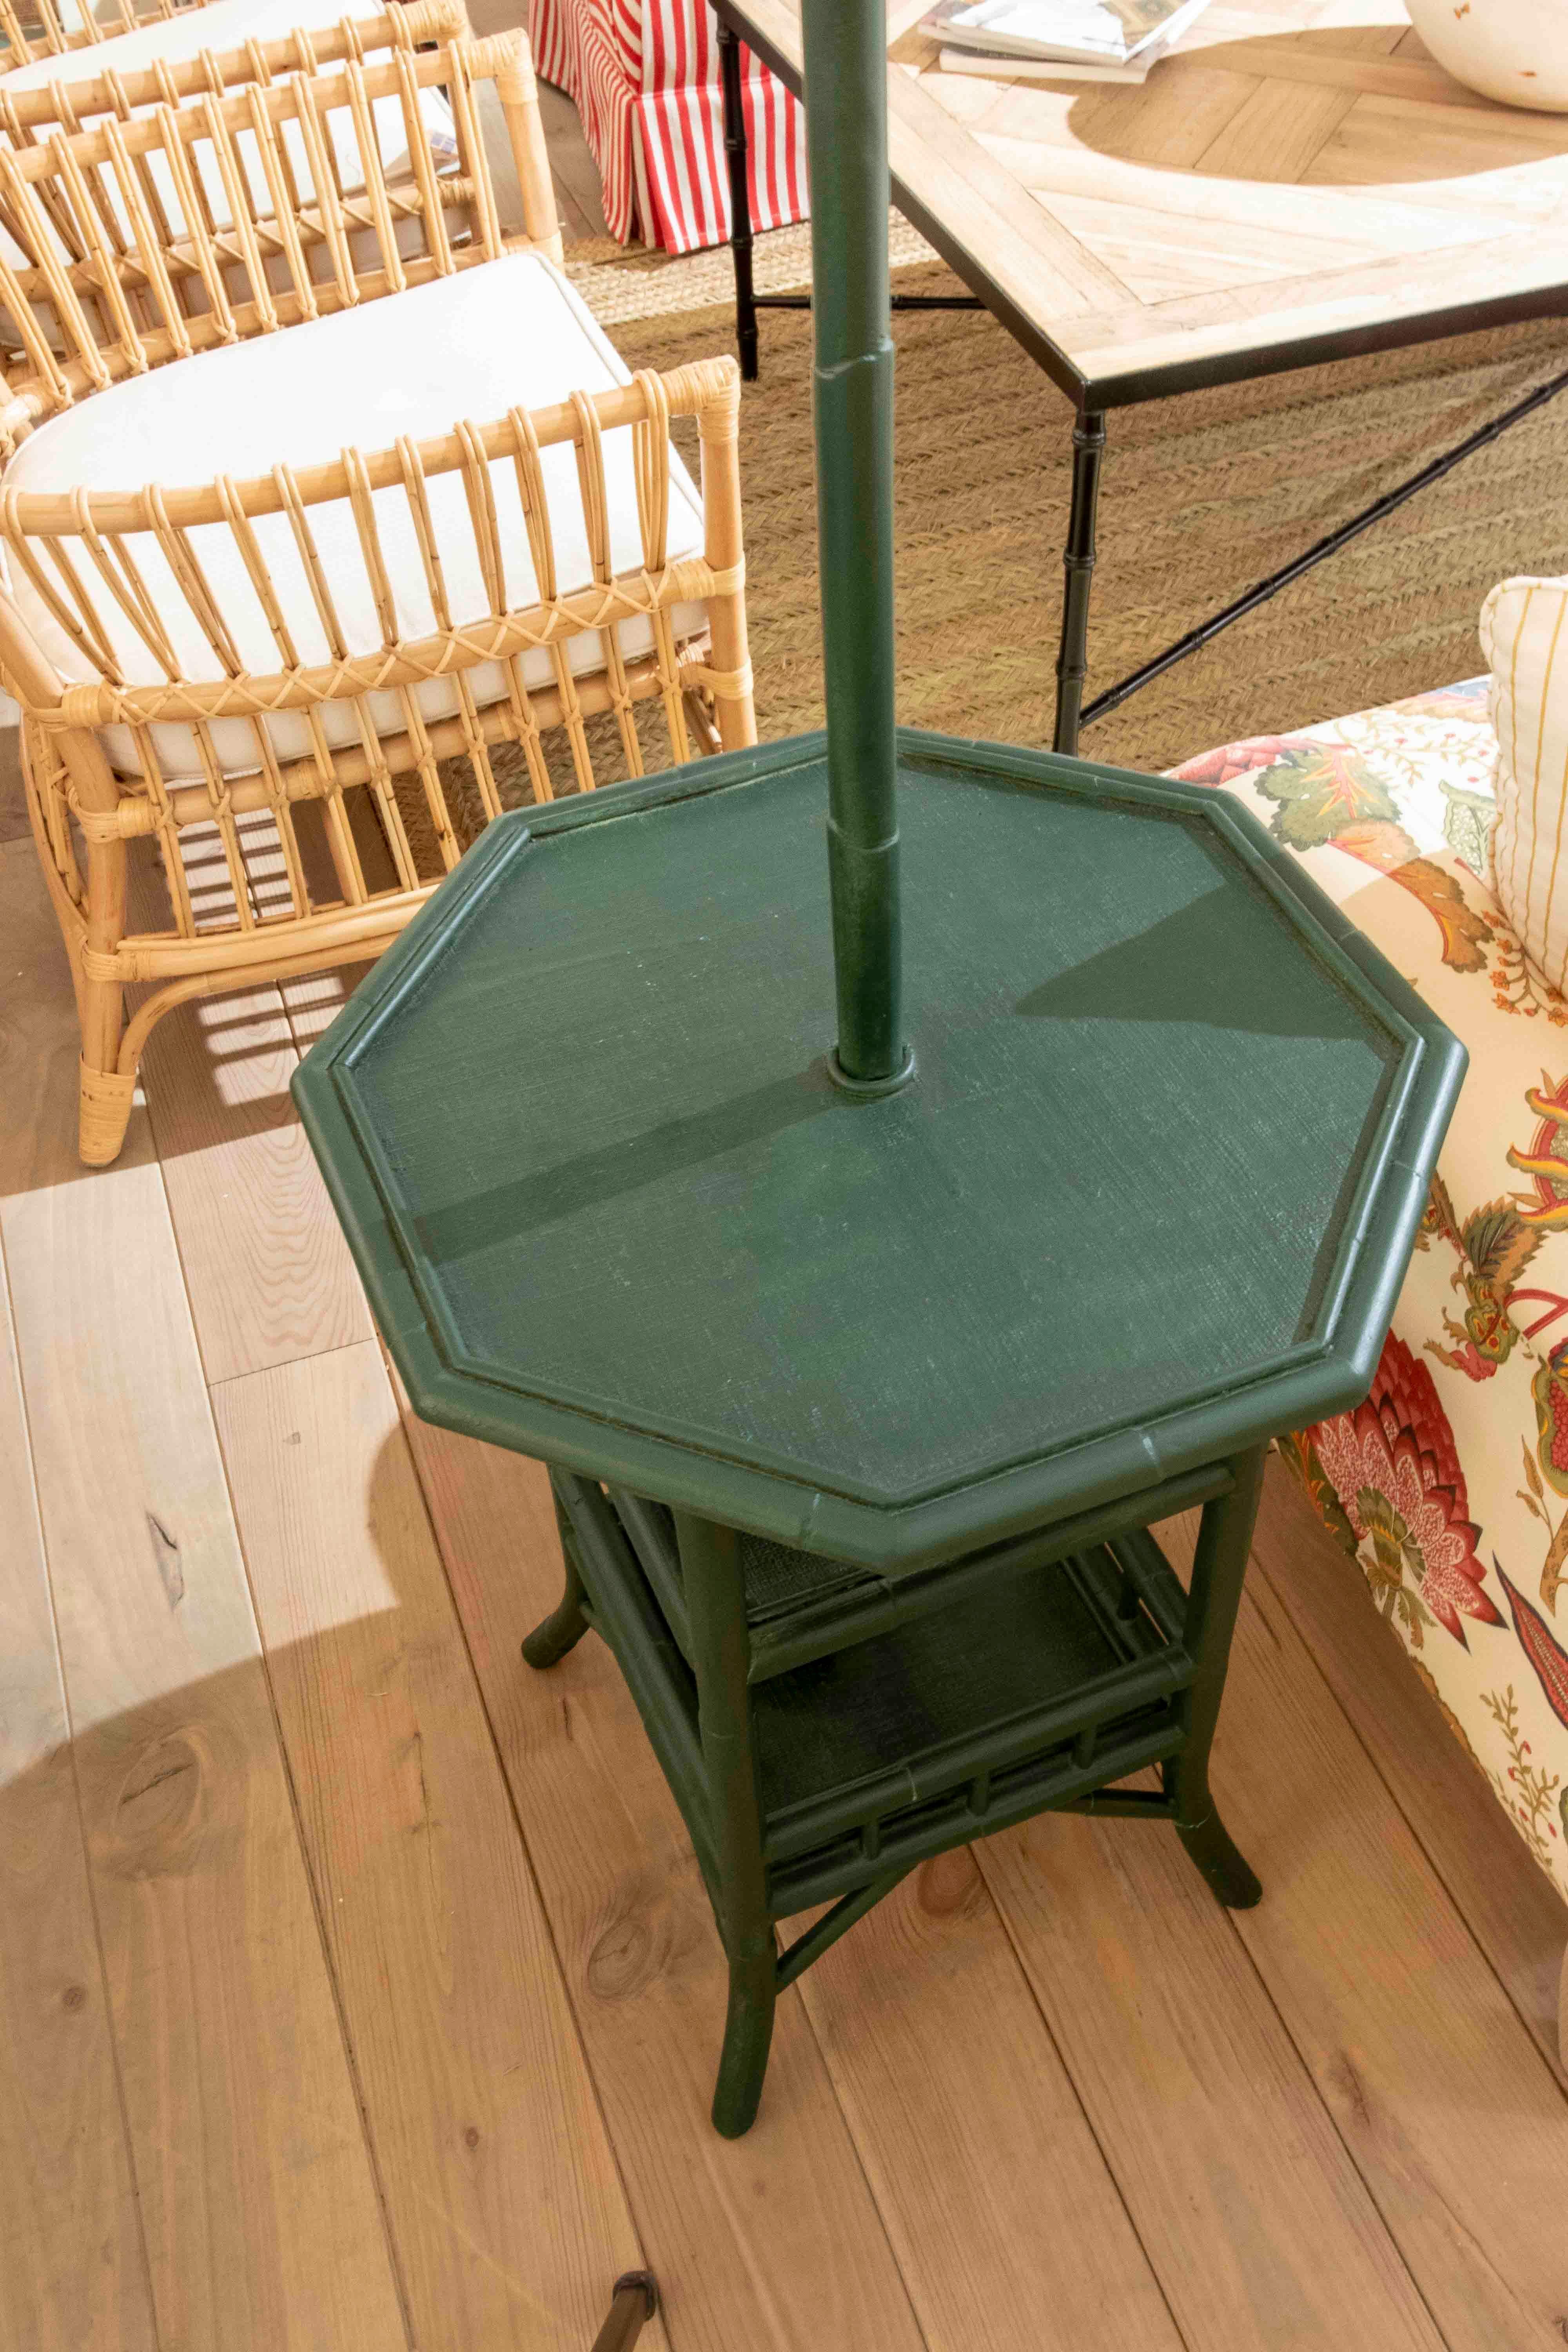 Bamboo and Wicker Floor Lamp with Three Shelves Painted in Green Tones 1